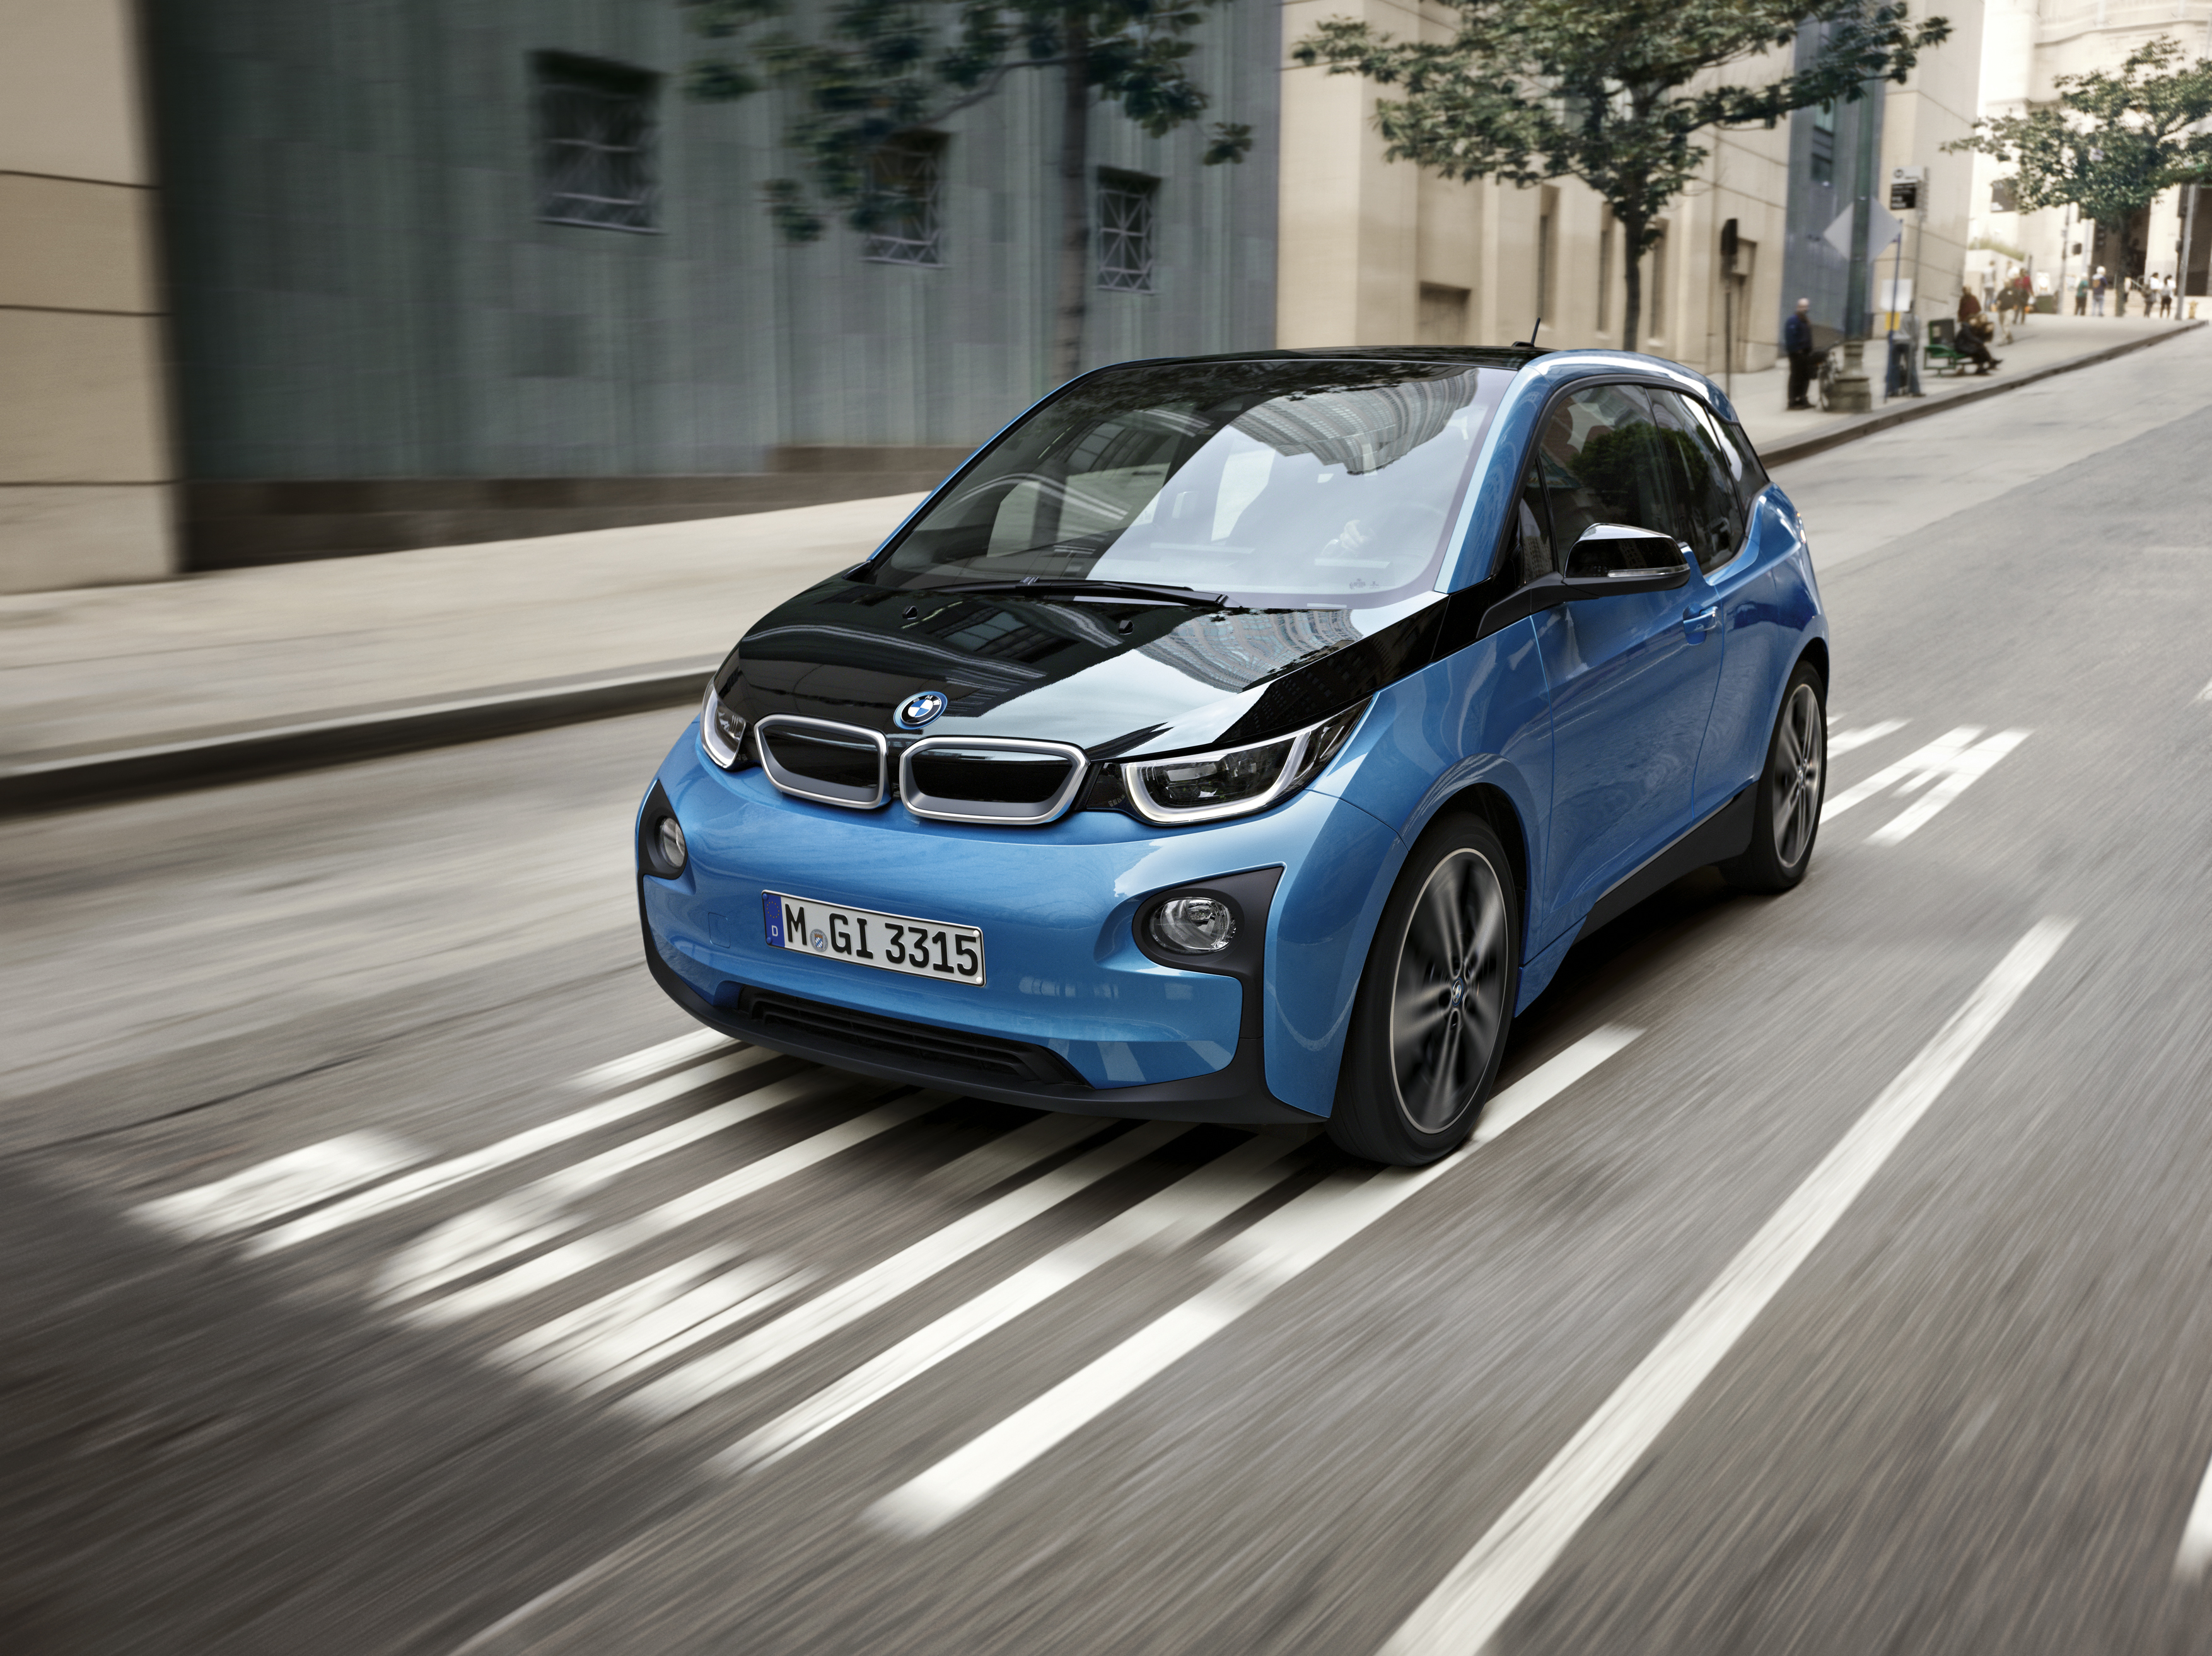 BMW says goodbye to one of its iconic electric cars